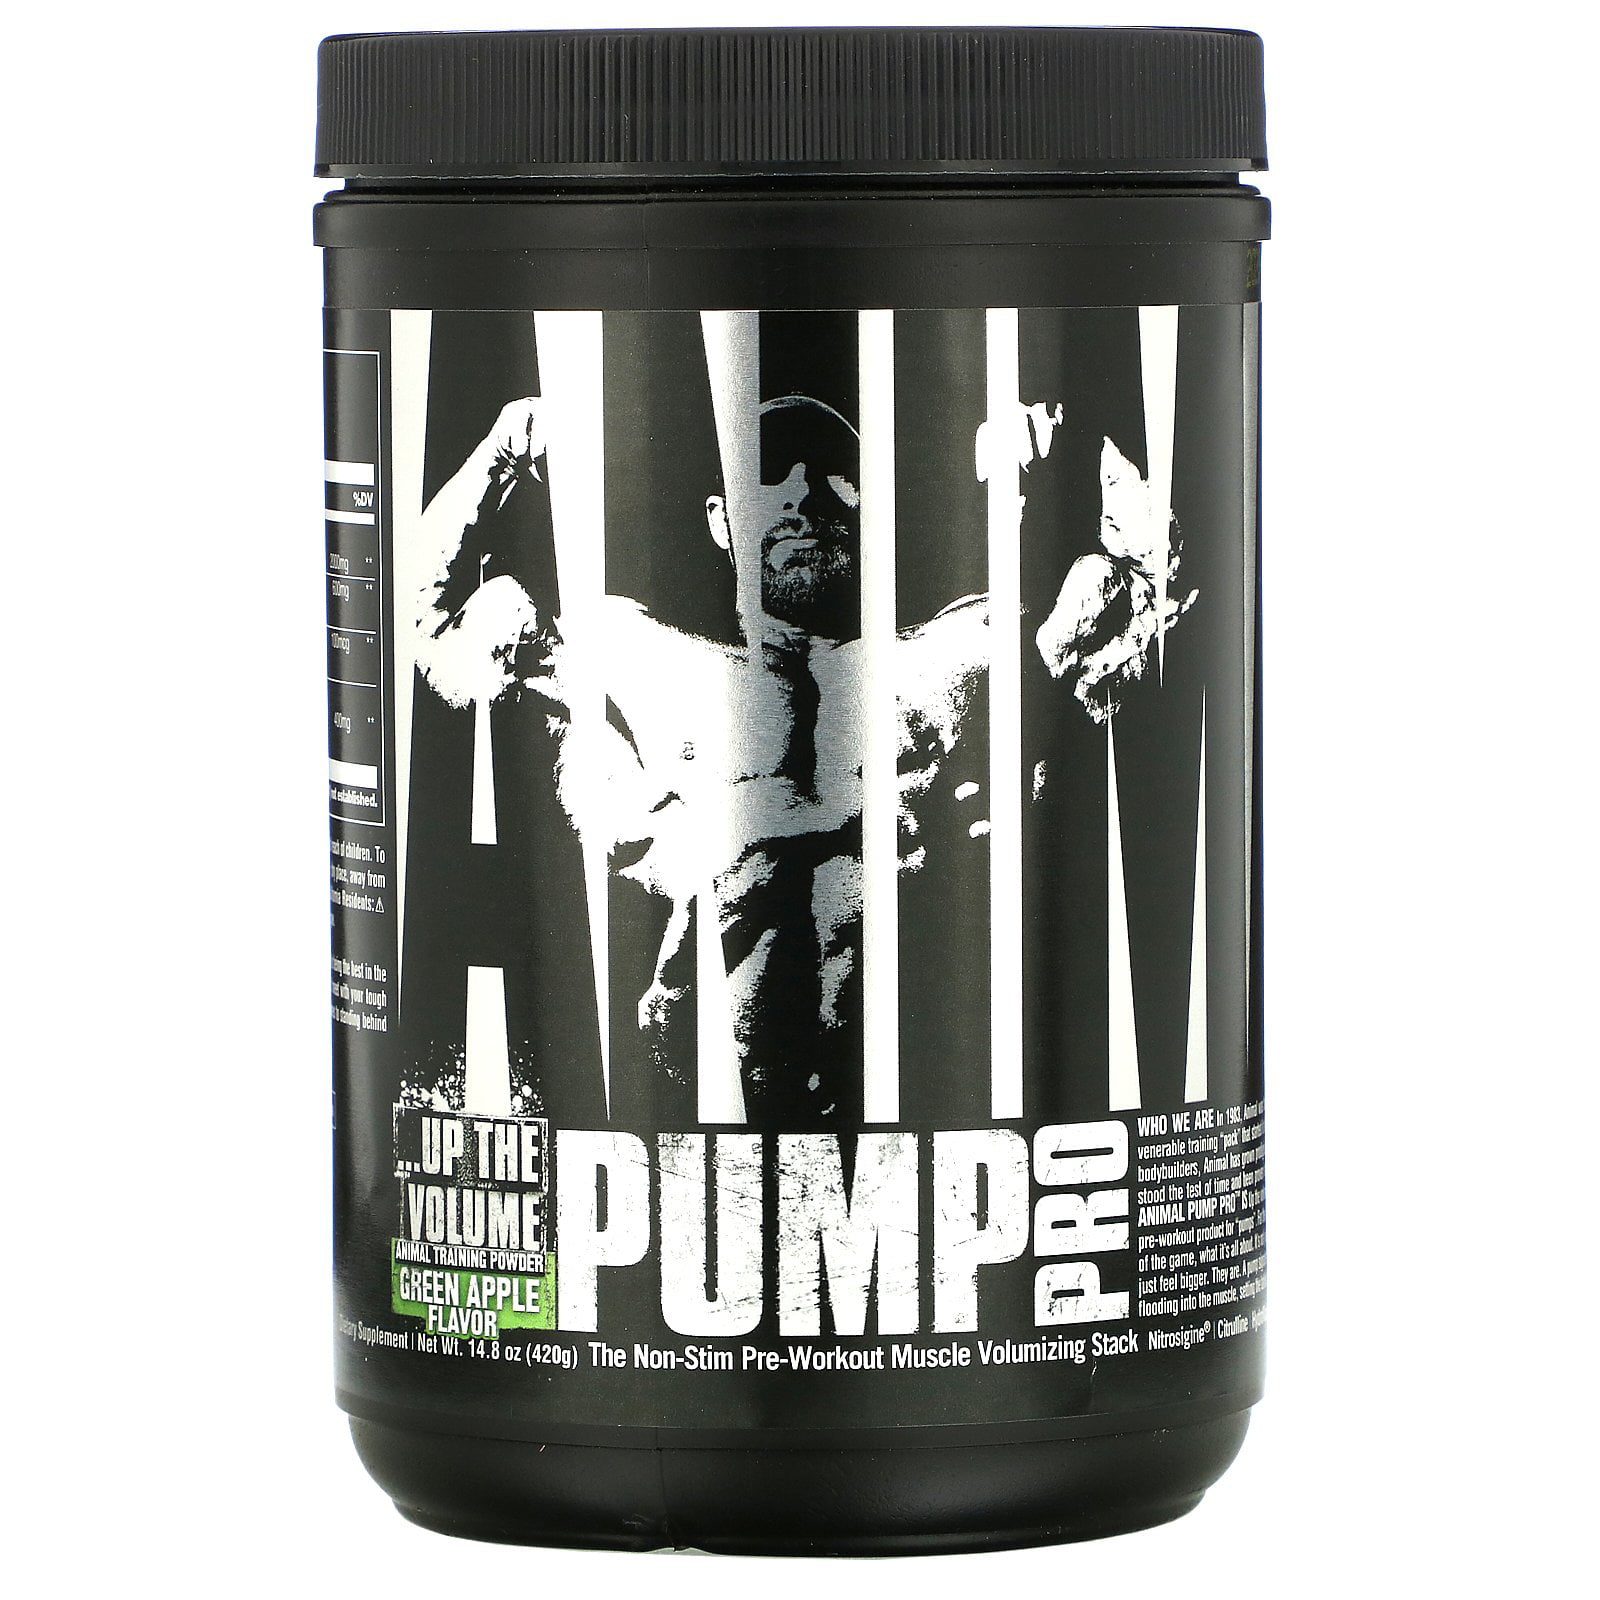 15 Minute Animal Pump Pre Workout Review for Weight Loss